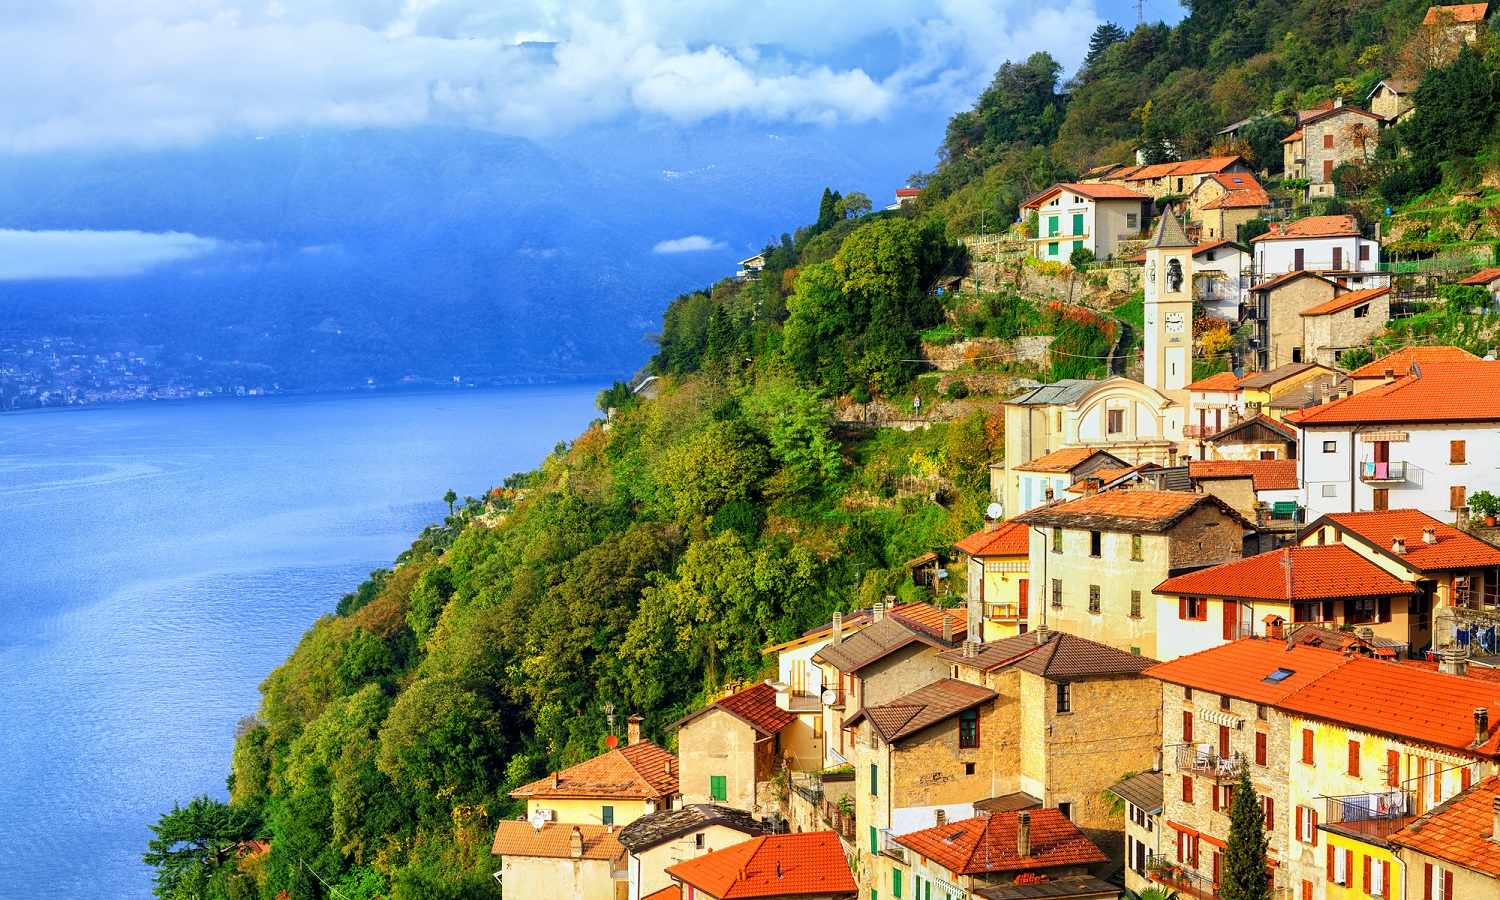 A small town on a hill on Lake Como in Northern Italy with coloured buildings with red roofs